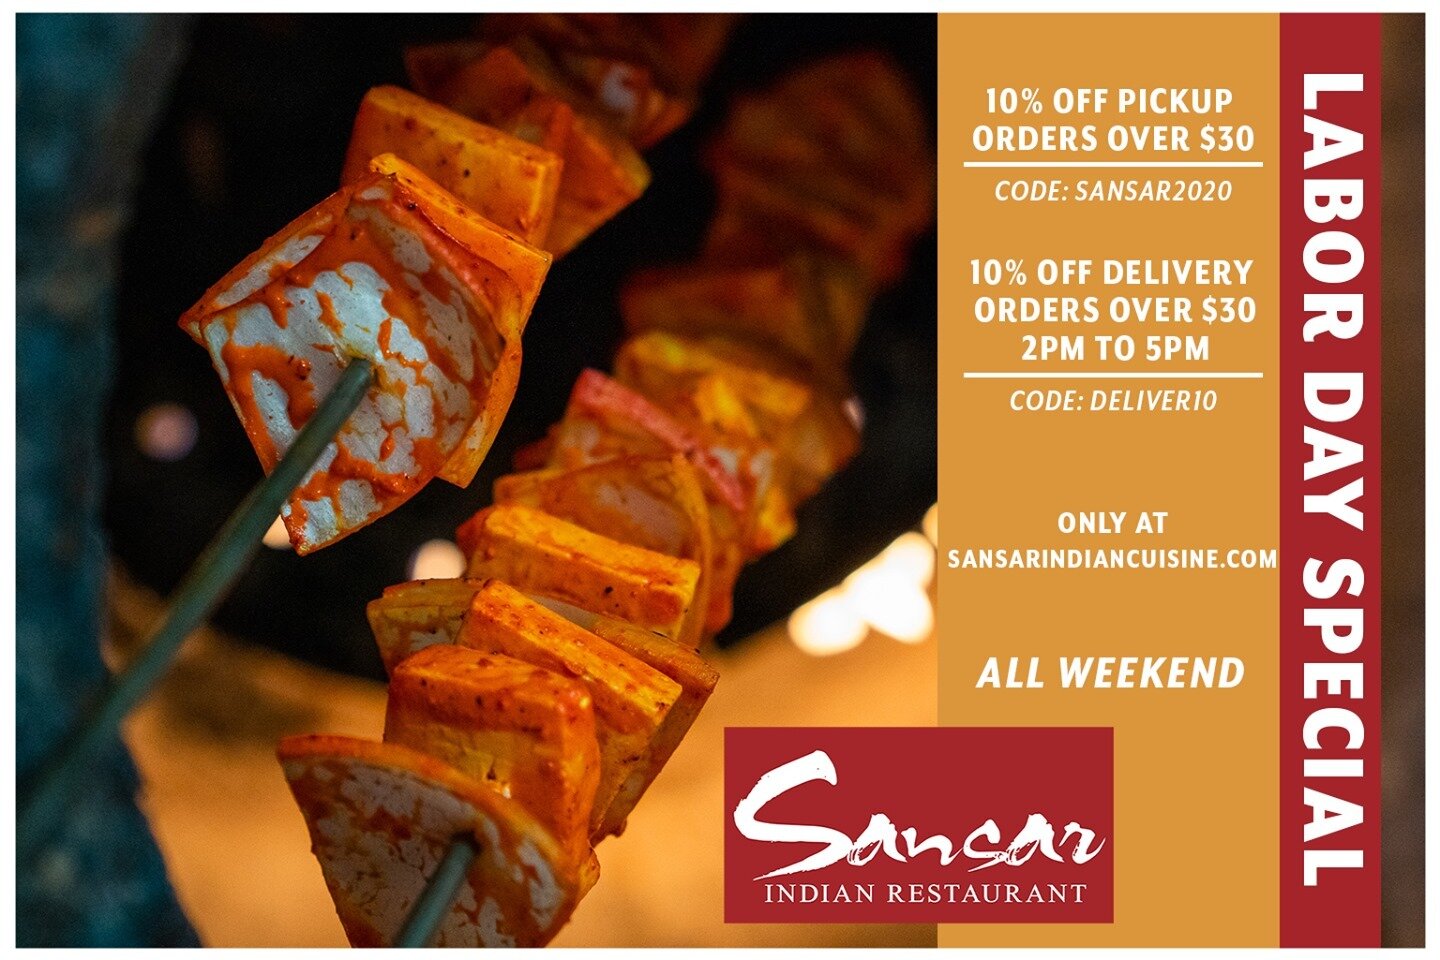 Labor Day Weekend Special! 🔥 10% off pickup orders over $30! Code: Sansar2020. 10% off delivery orders over $30 between 2PM and 5PM! Code: Deliver10. Only available on our website! Visit www.SansarIndianCusine.com to place your order for pickup or d